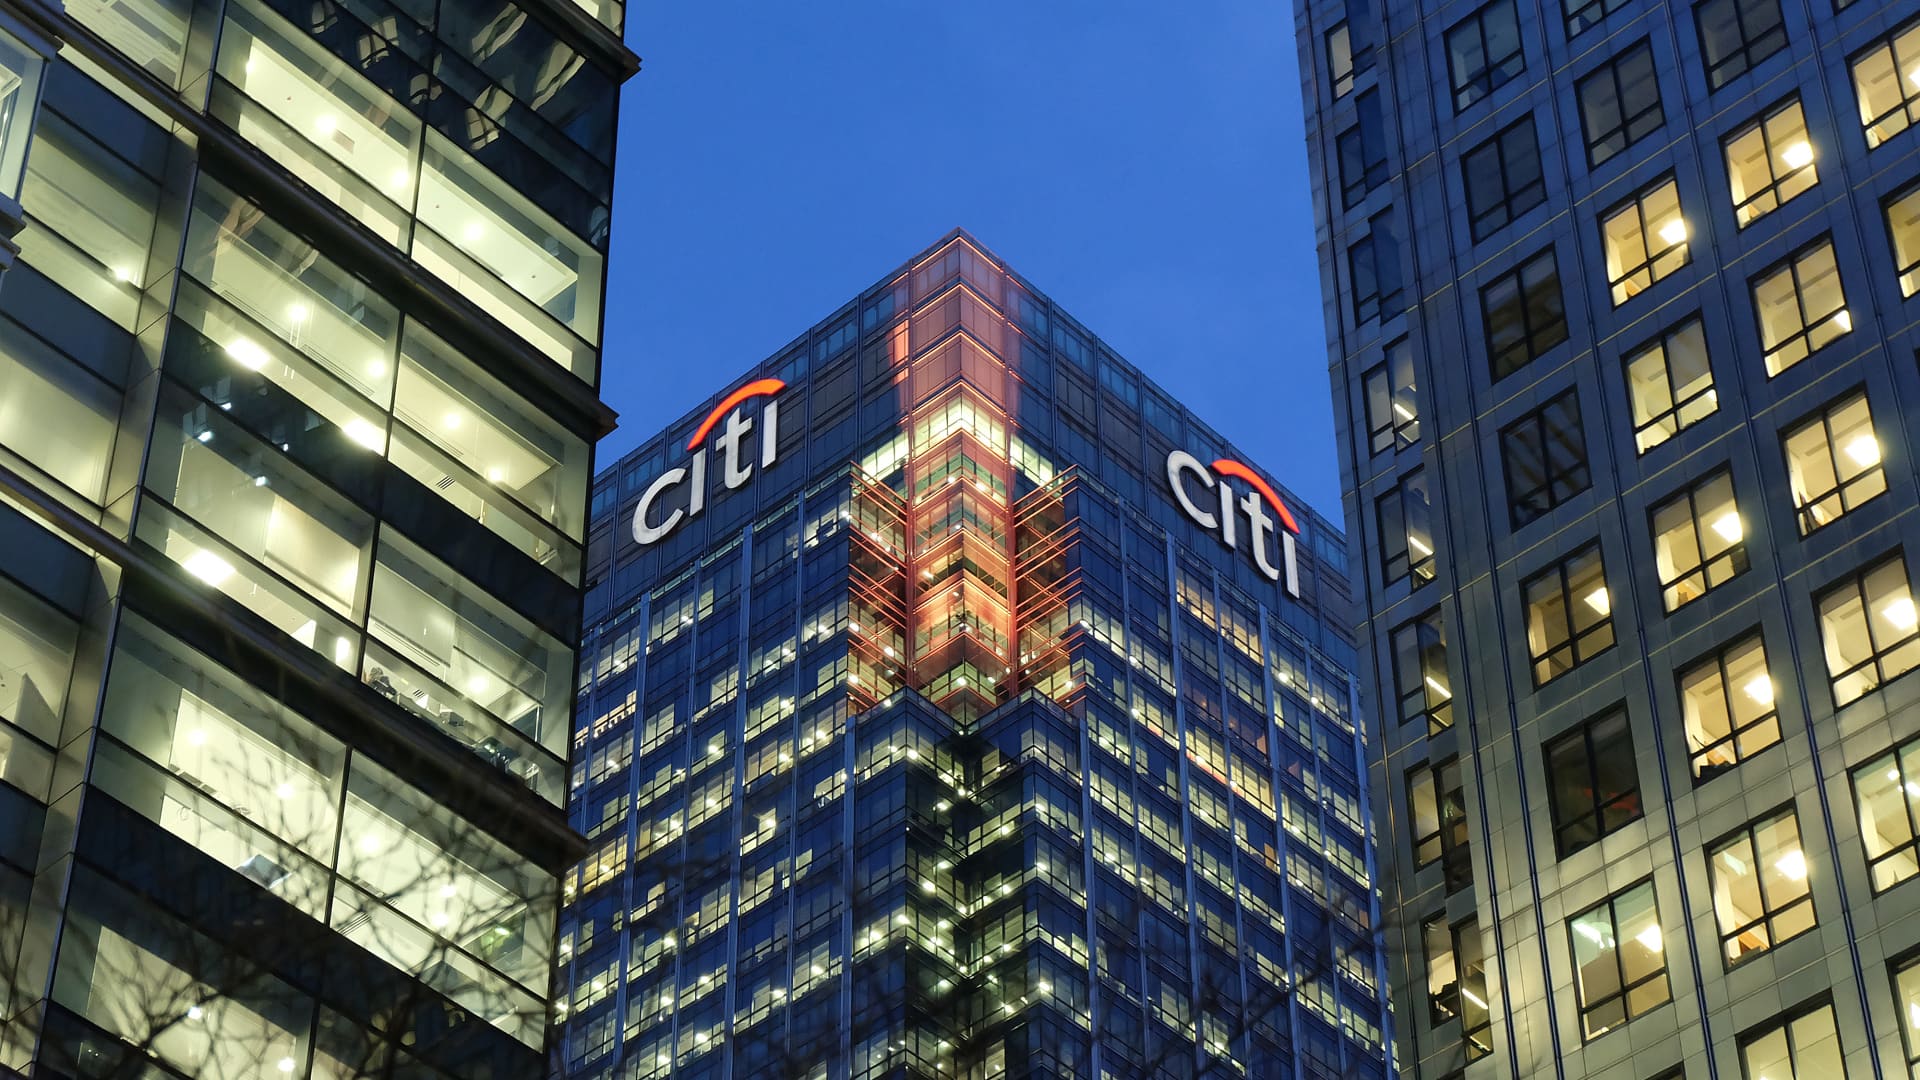 Citigroup’s fourth-quarter profit falls 21% as the bank sets aside more money for credit losses